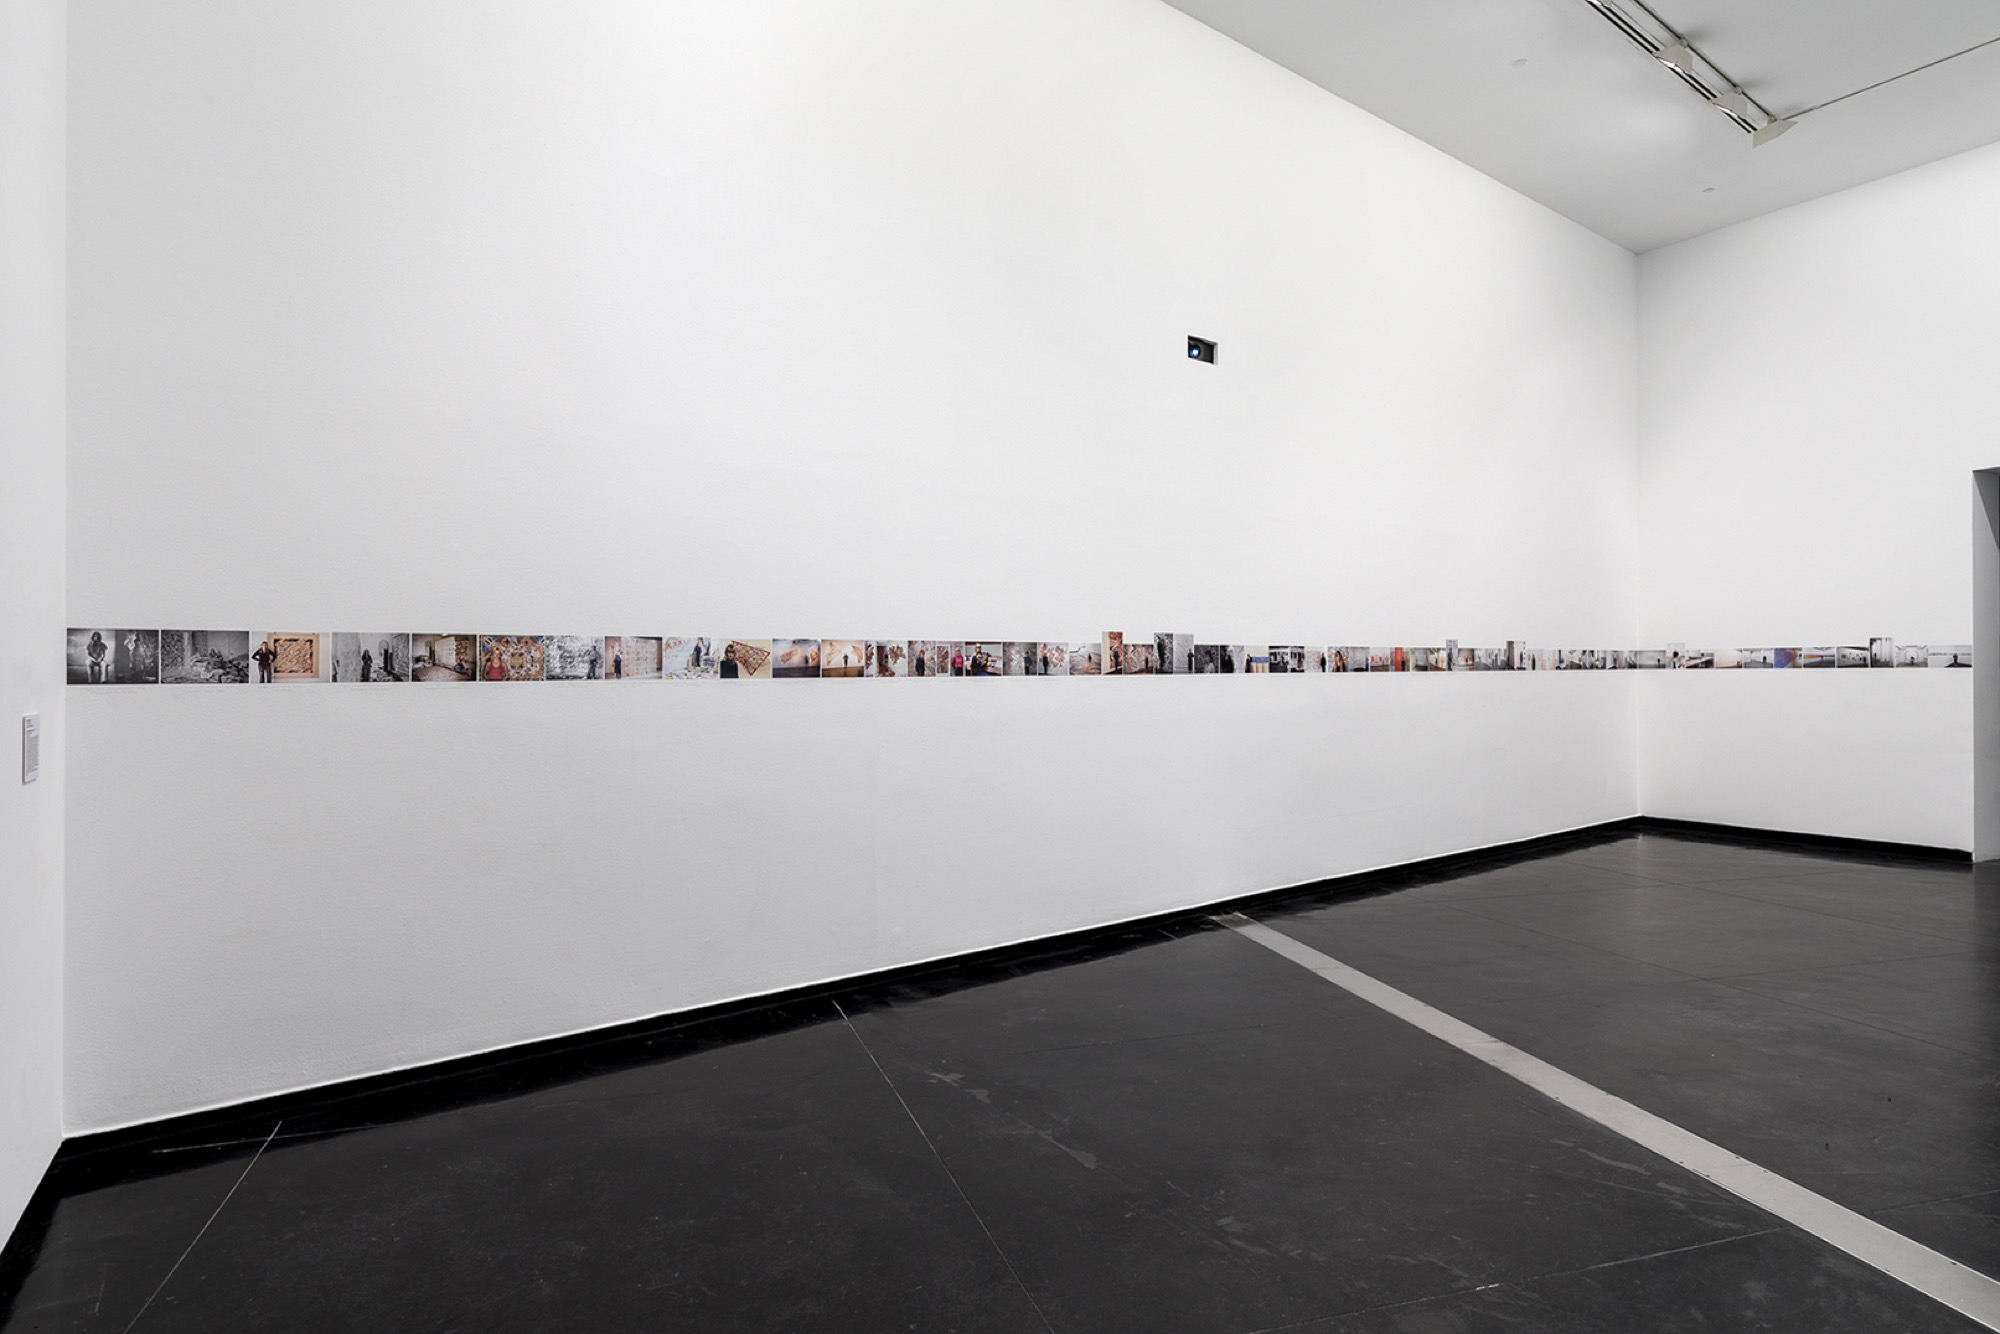 Elizabeth Gower, <em>Portrait of the artist as a young woman</em>(installation view), 1974 – 2017, photographs and digital prints, installation view. Image credit: Andrew Curtis, © the artist, courtesy of the artist, Sutton Gallery, Melbourne and Milani Gallery, Brisbane.